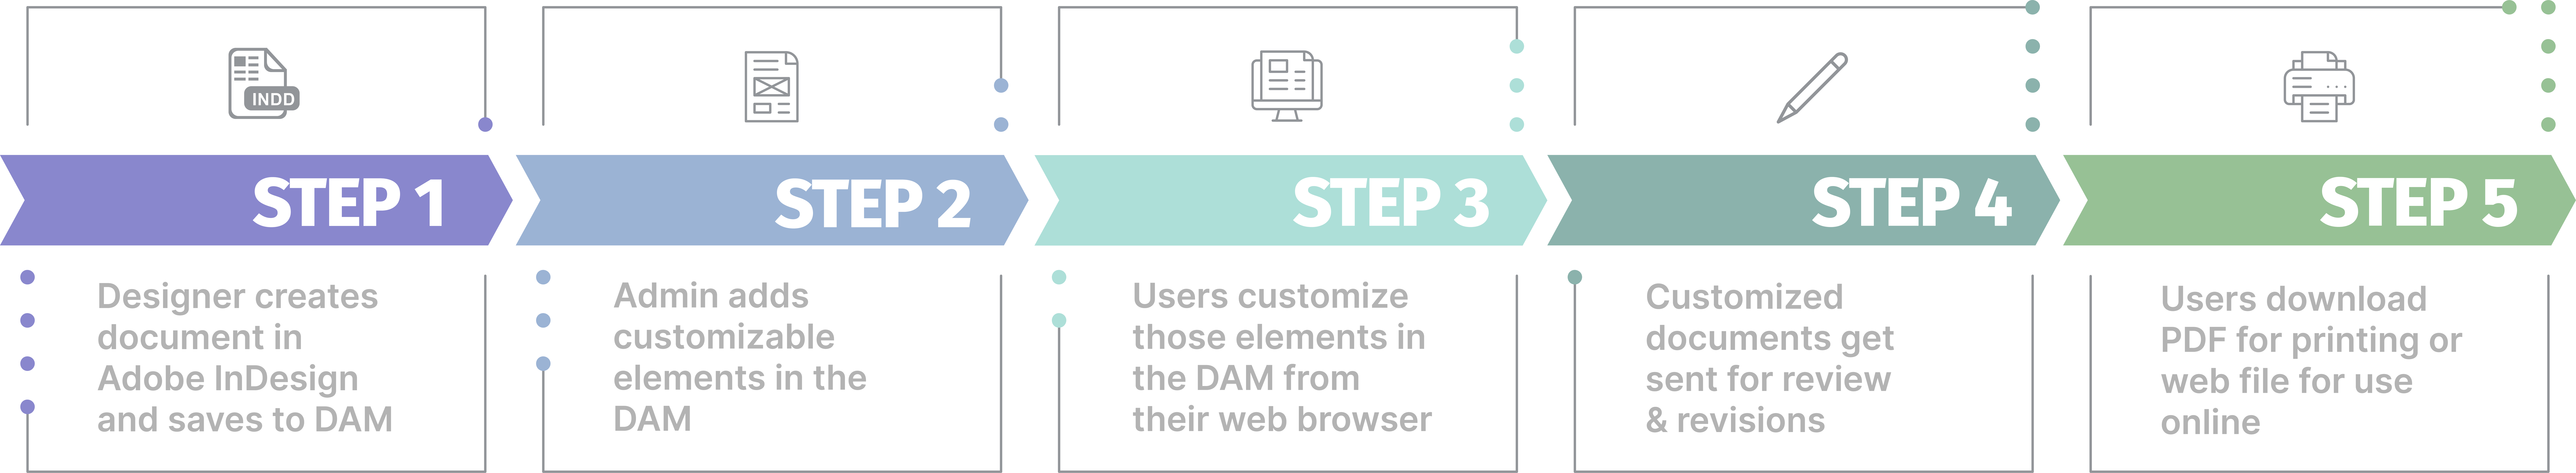 Step 1: Designer creates document in Adobe InDesign and save to DAM; Step 2: Admin adds customizable elements in the DAM; Step 3: Users customize those elements in the DAM from their web browser; Step 4: Customized documents get sent for review & revisions; Step 5: Users download PDF for printing or web file for use online